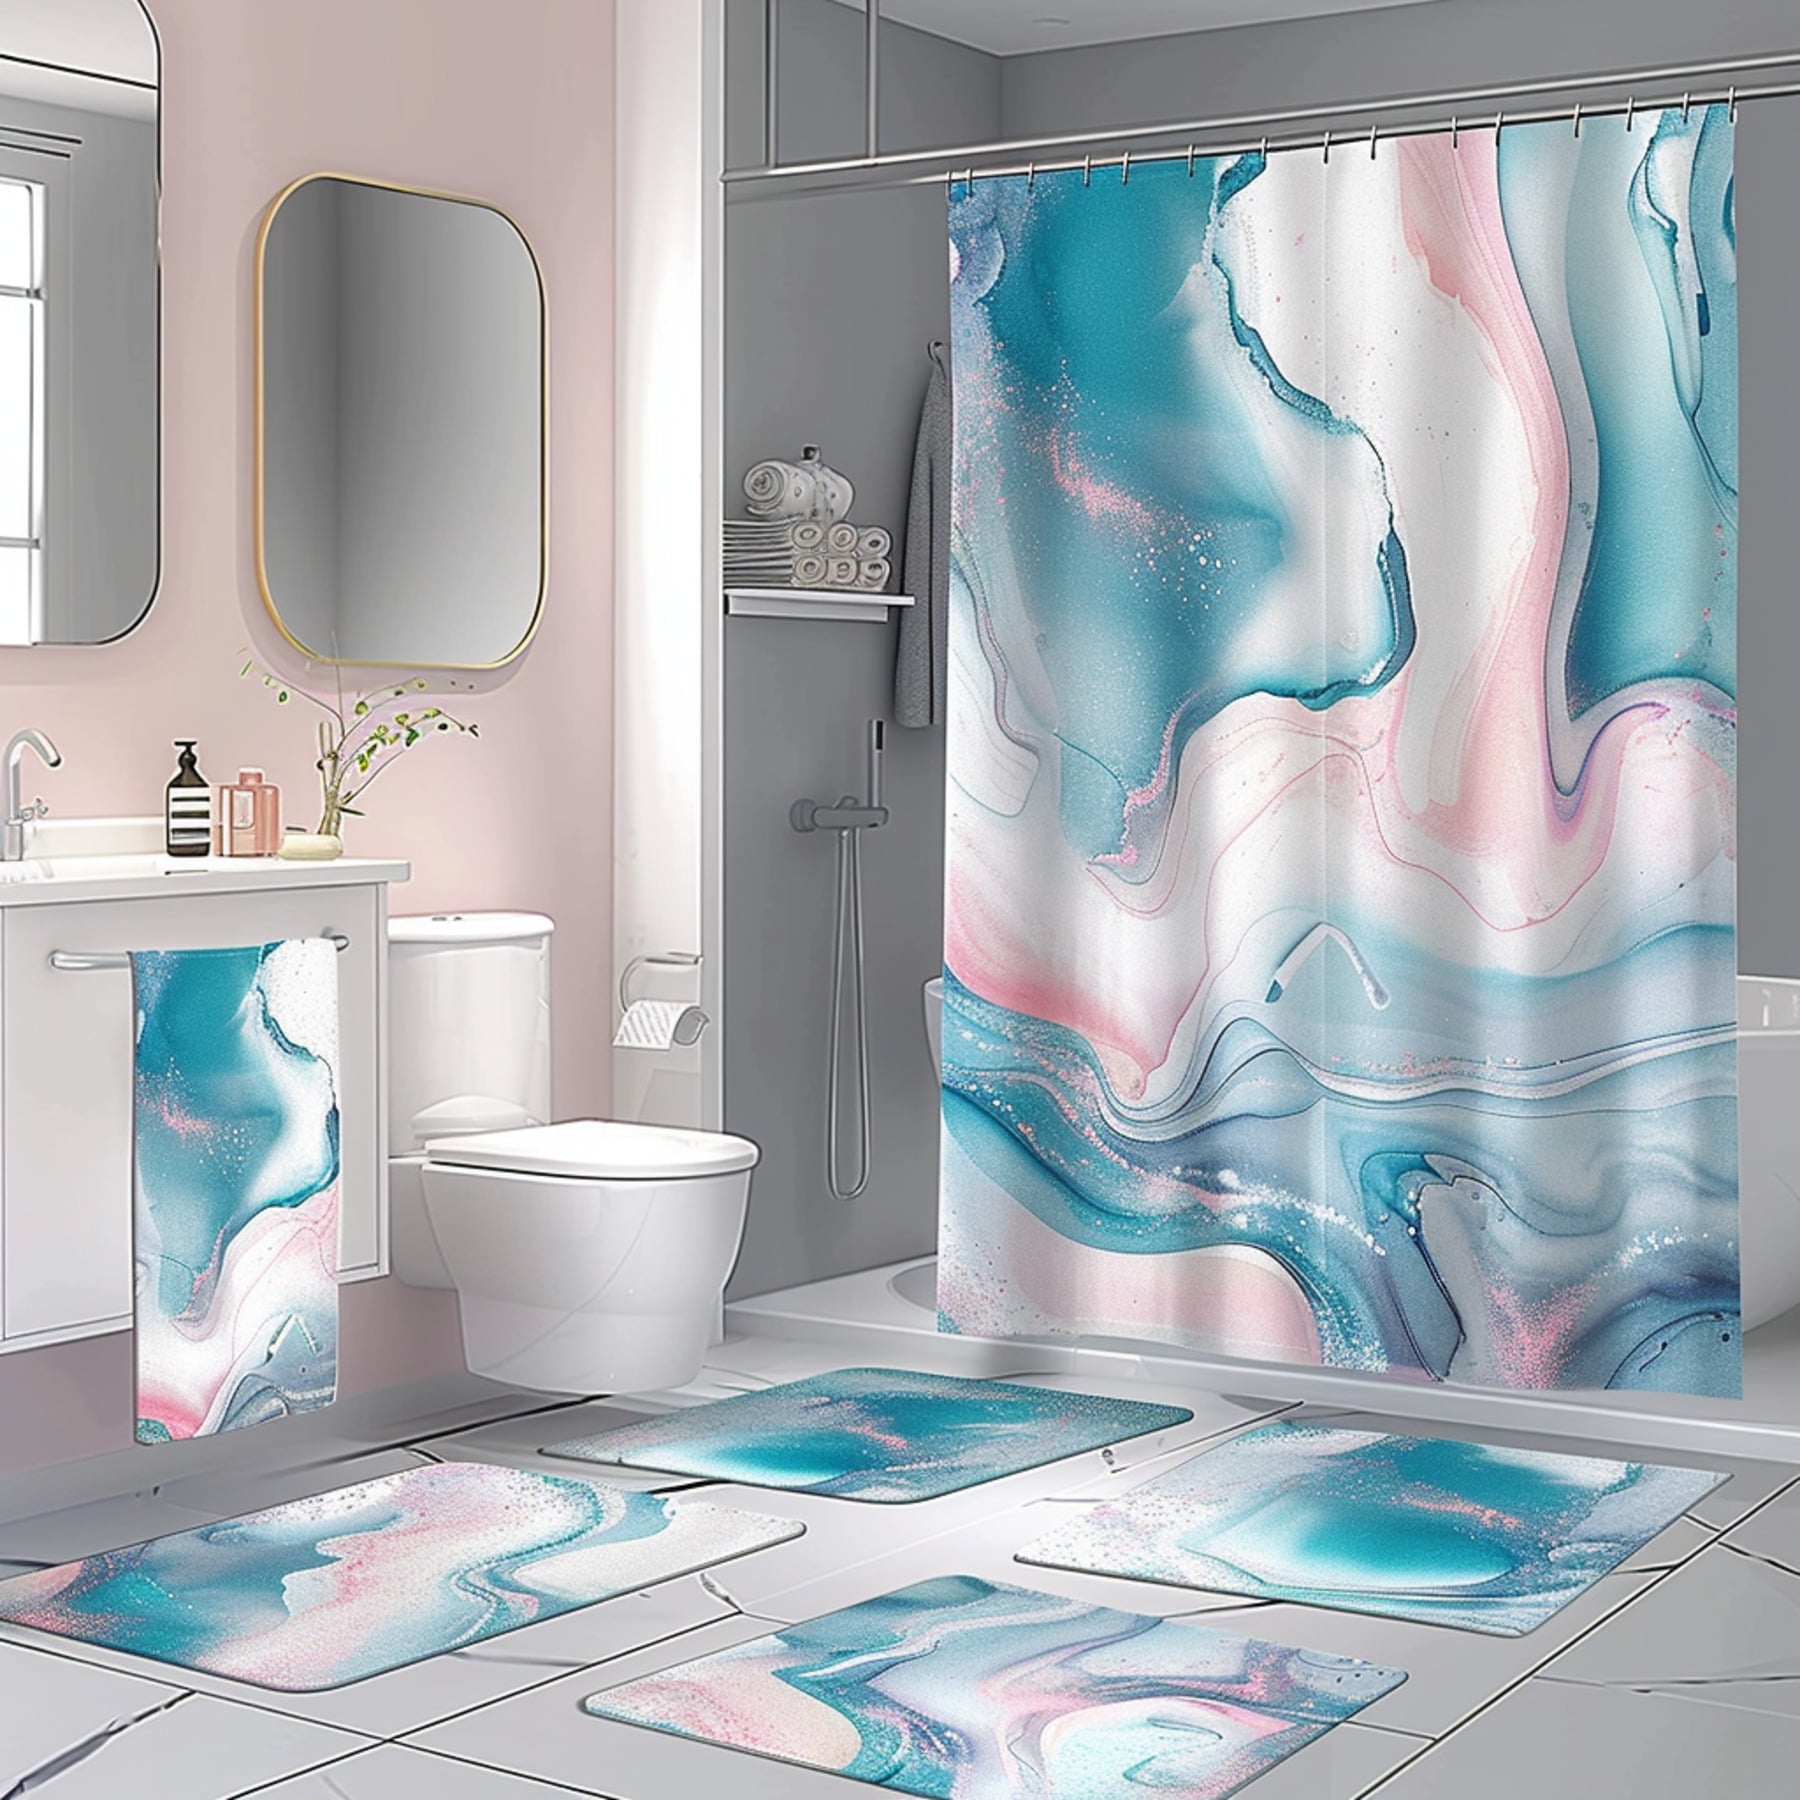 Elegant Marble Texture Bathroom Set With Abstract Watercolor Shower Curtain Modern Luxury Design